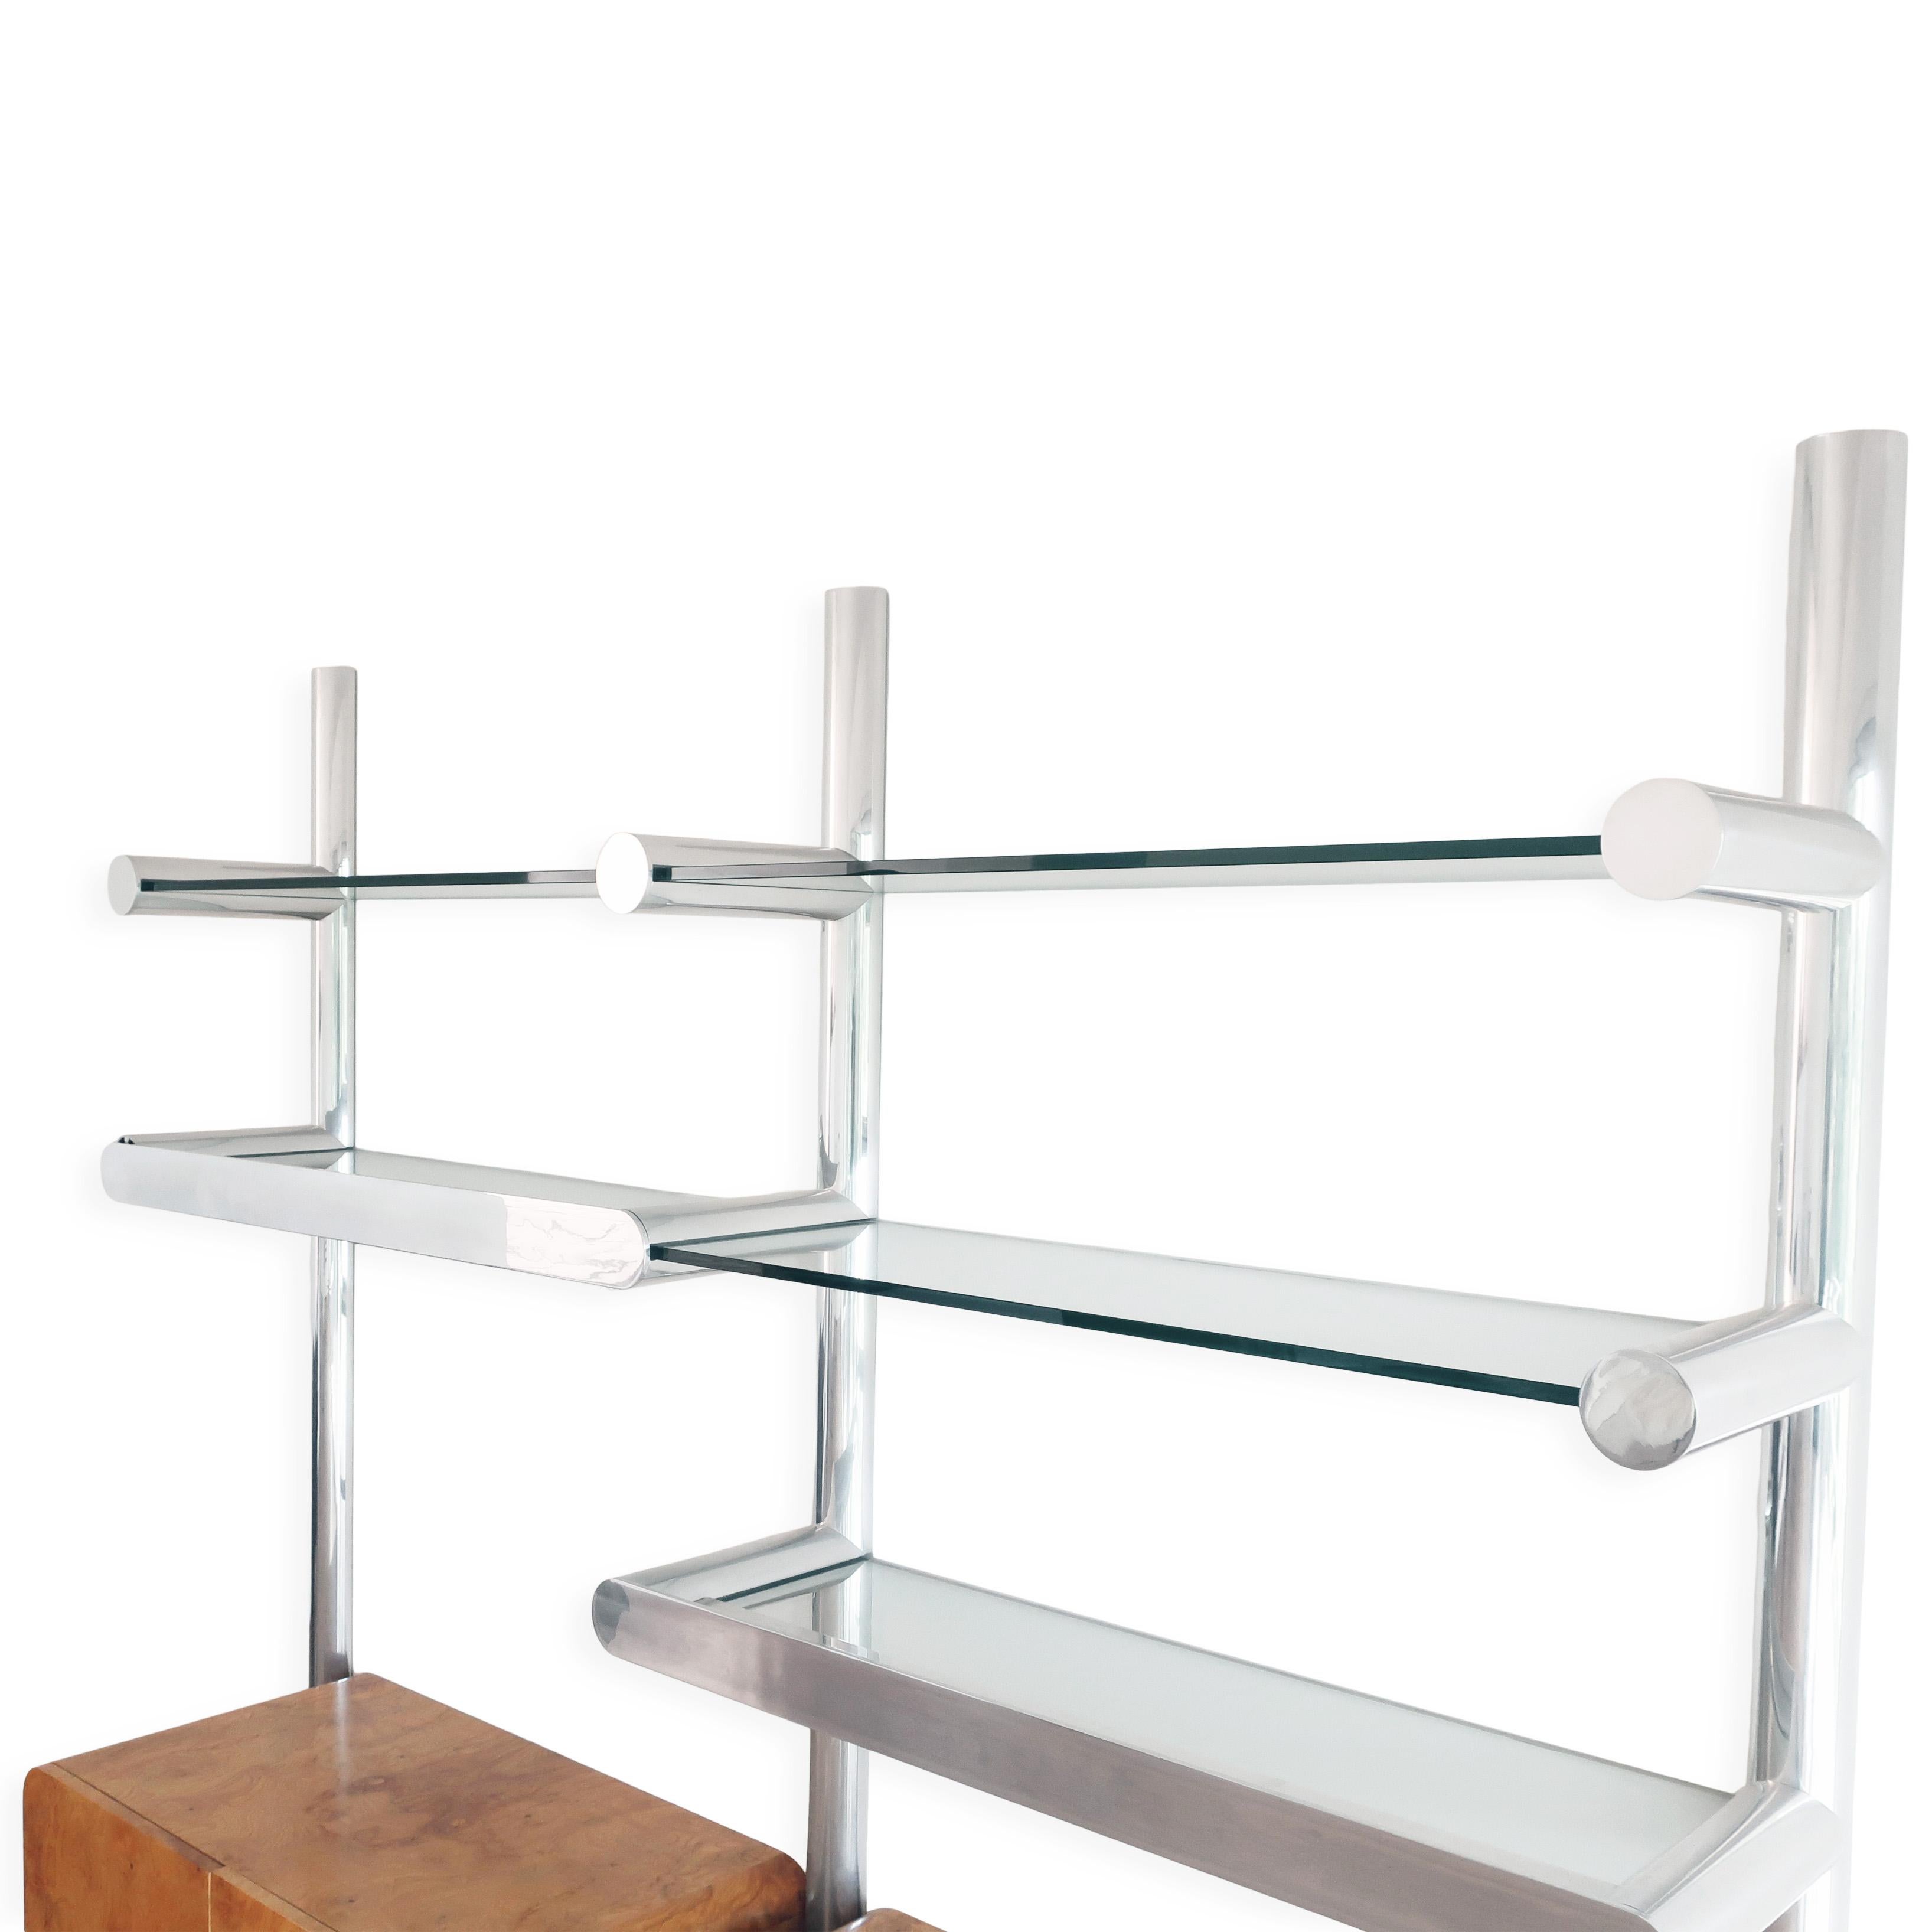 1970s Aluminum and Glass Orba Wall Unit by Janet Schweitzer for Pace Collection In Good Condition For Sale In Brooklyn, NY